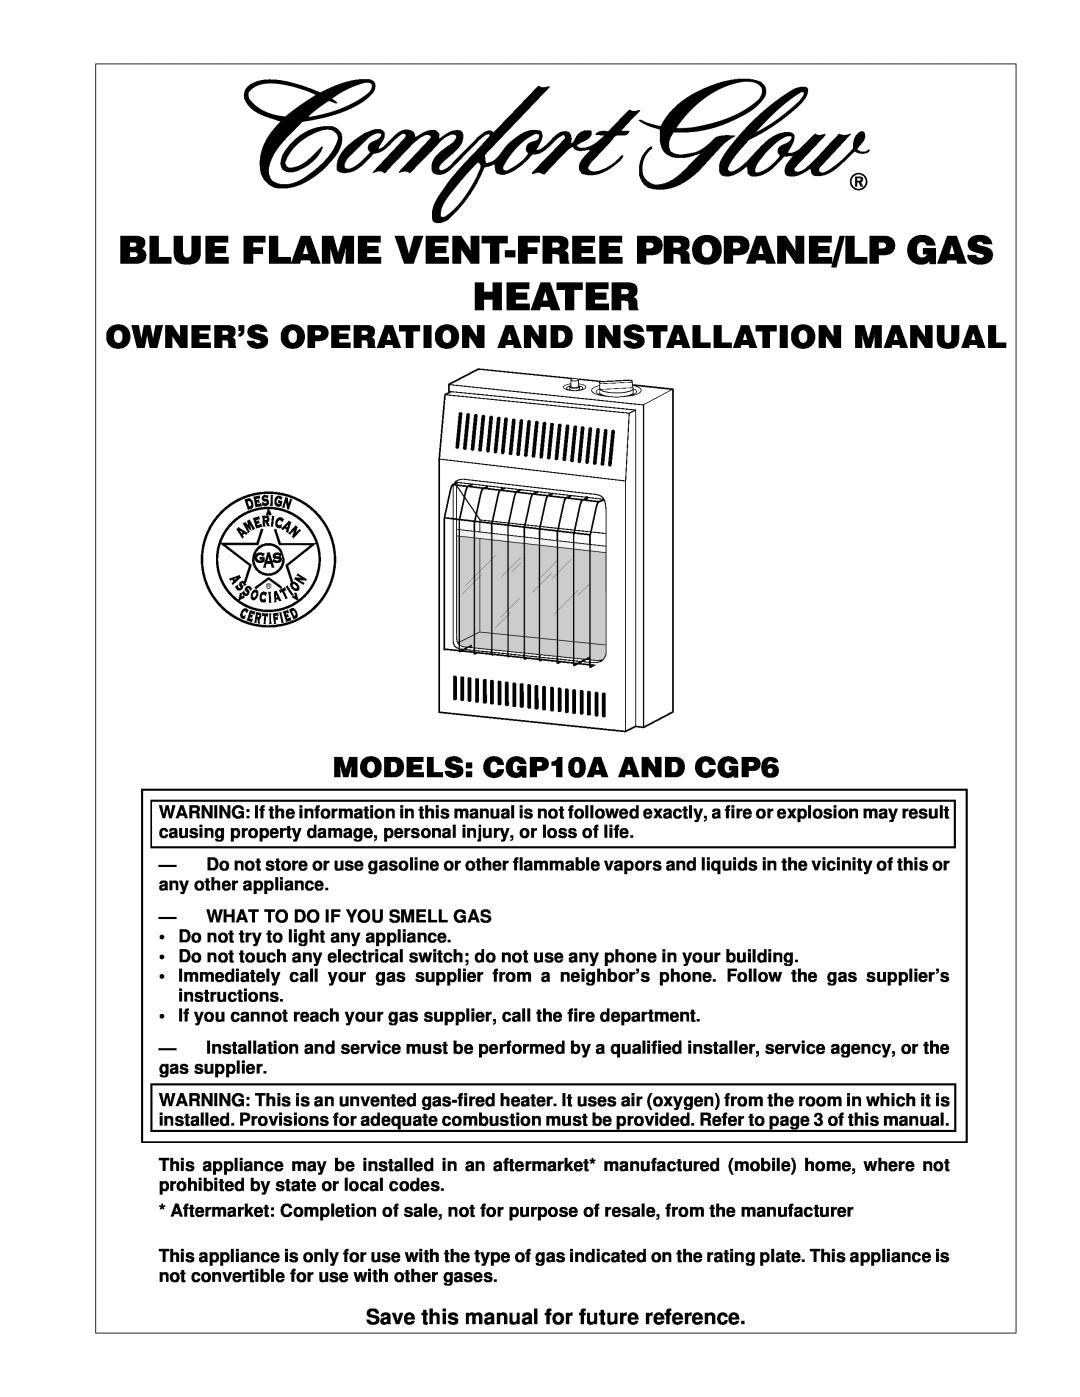 Desa installation manual Owner’S Operation And Installation Manual, MODELS CGP10A AND CGP6 